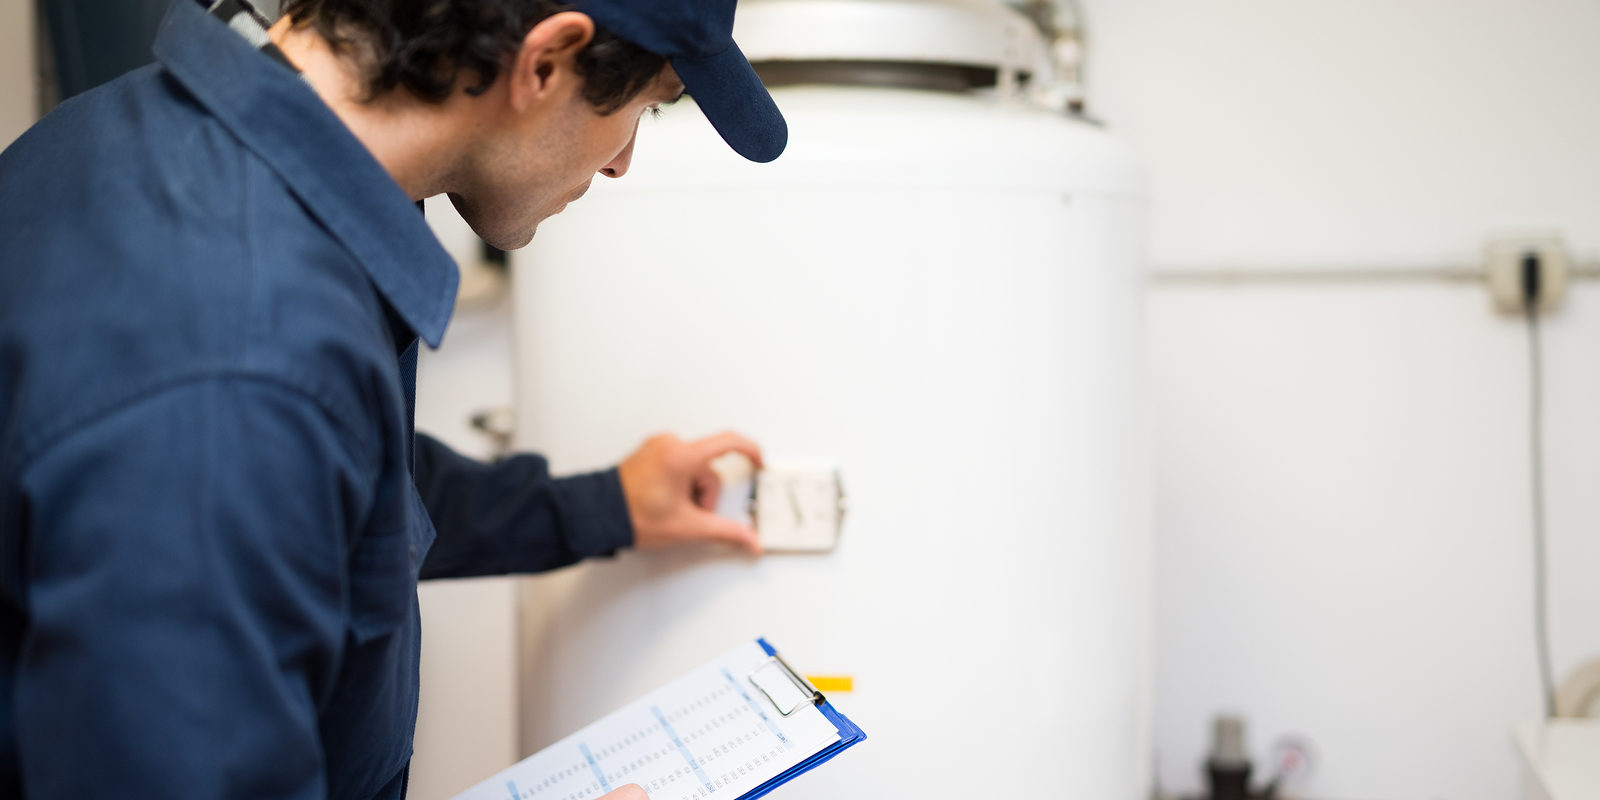 A plumber providing DIY tips for water heater maintenance.